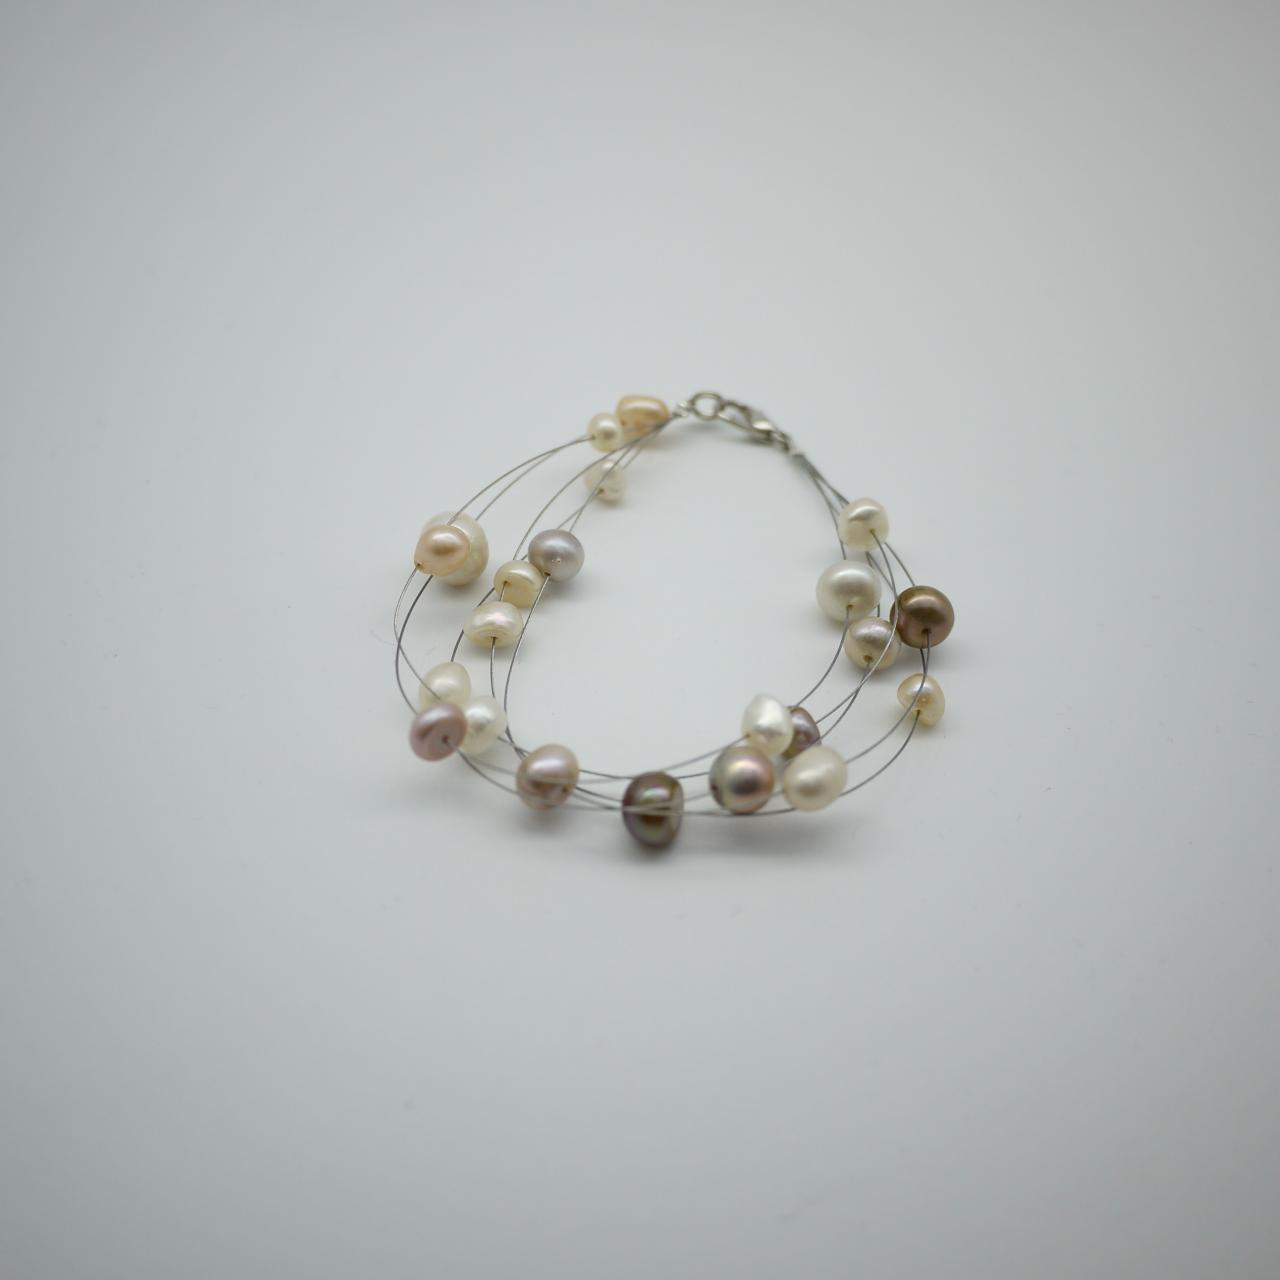 Simply Bracelet - Freshwater Pearl Bracelet - Purple, Pink And White Pearl